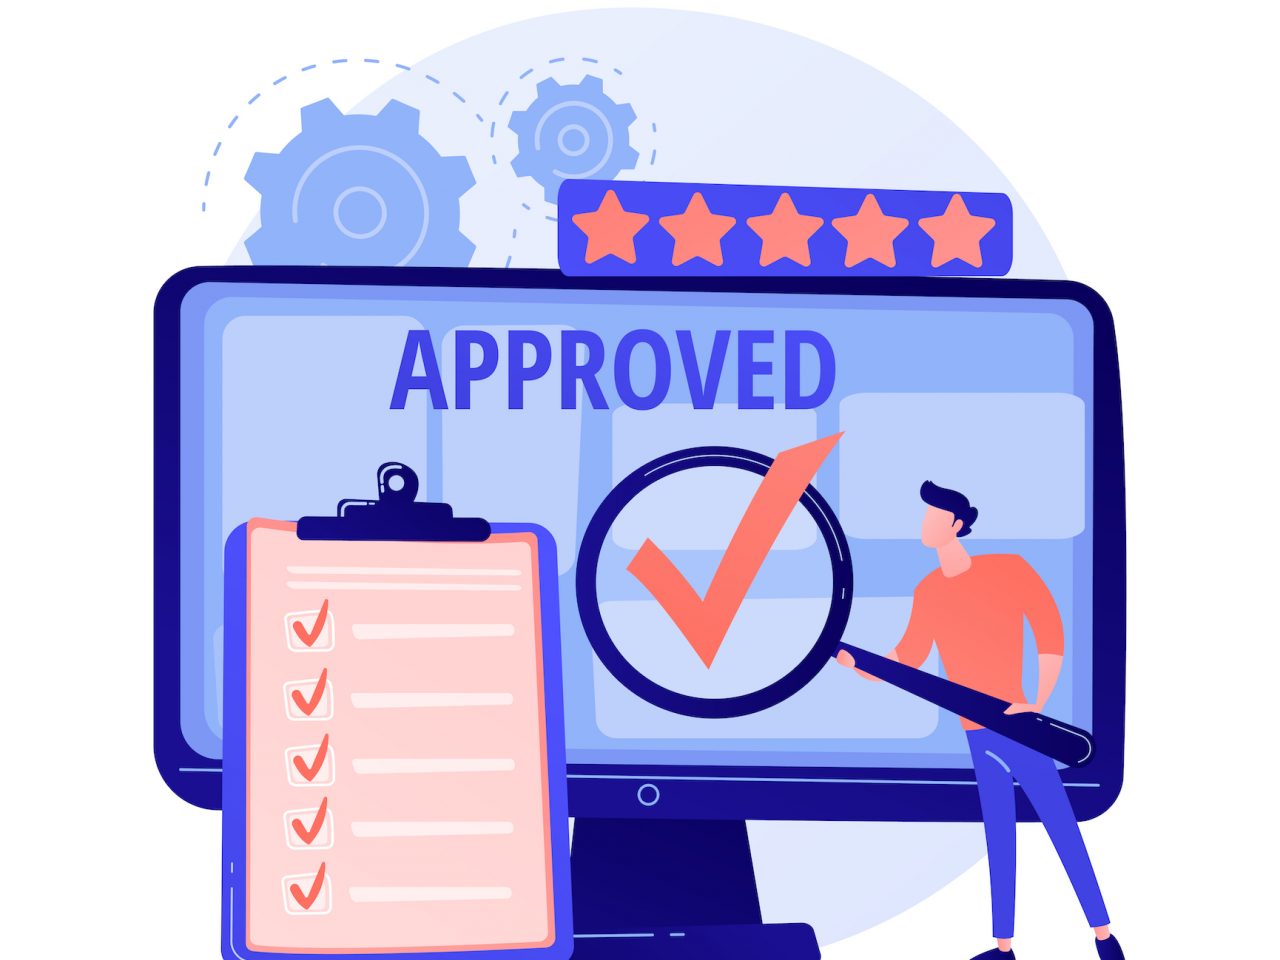 Expert approved. Cartoon character holding checkmark symbol on hand. Finished task, done sign. Satisfactory, official sanction, acceptance. Vector isolated concept metaphor illustration